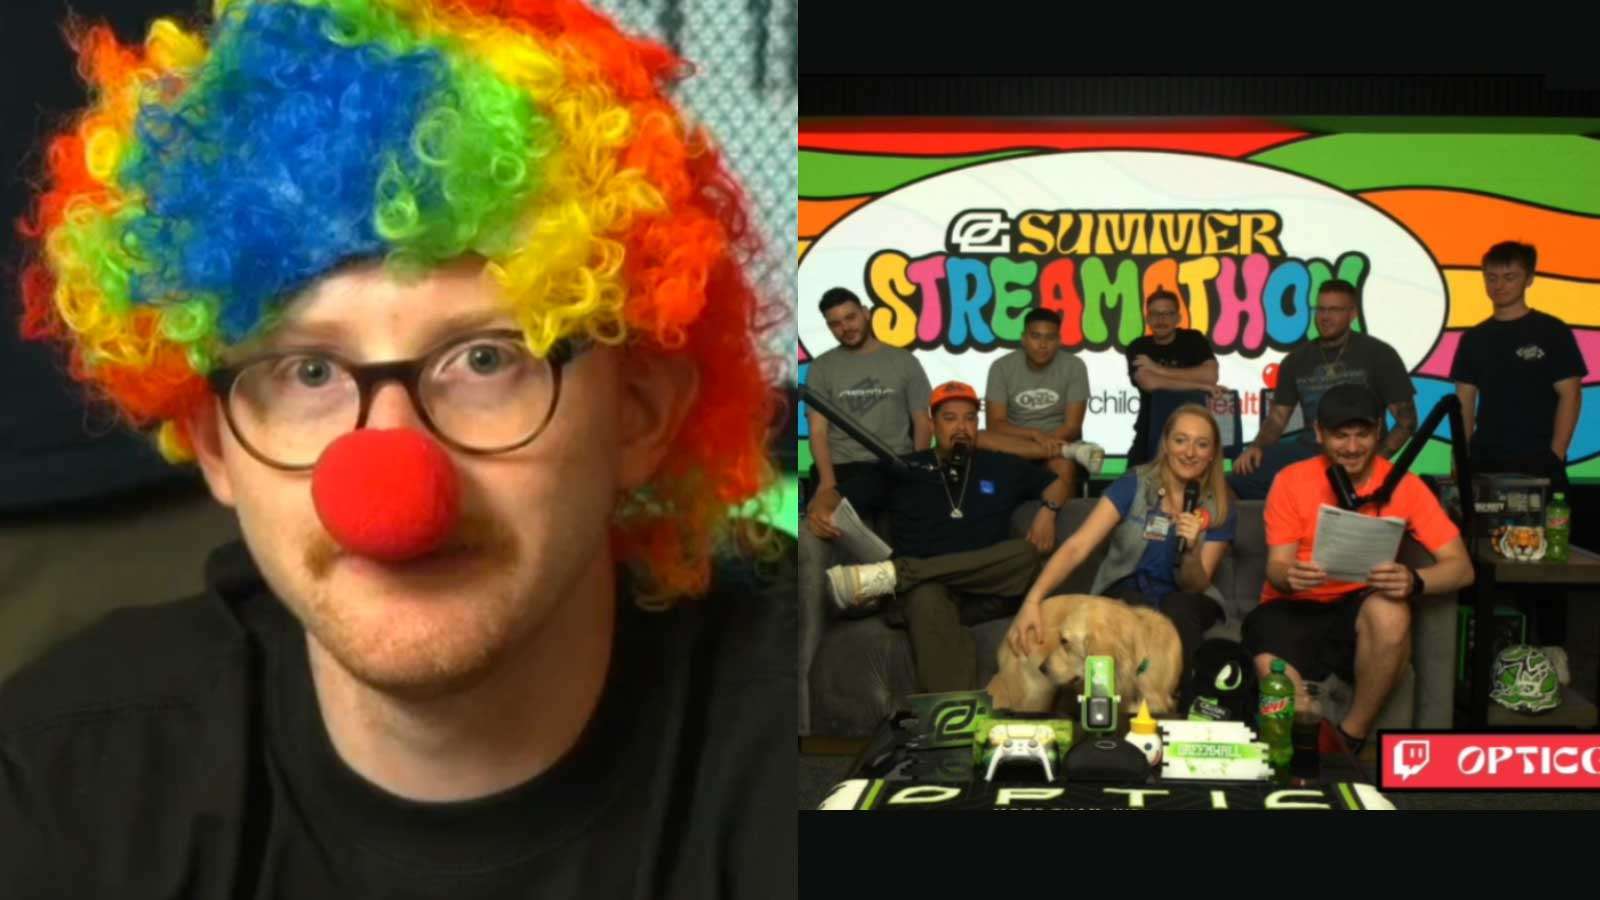 Scump dressed up as a clown and OptTic gaming livestreaming the OpTic Streamathon stream.